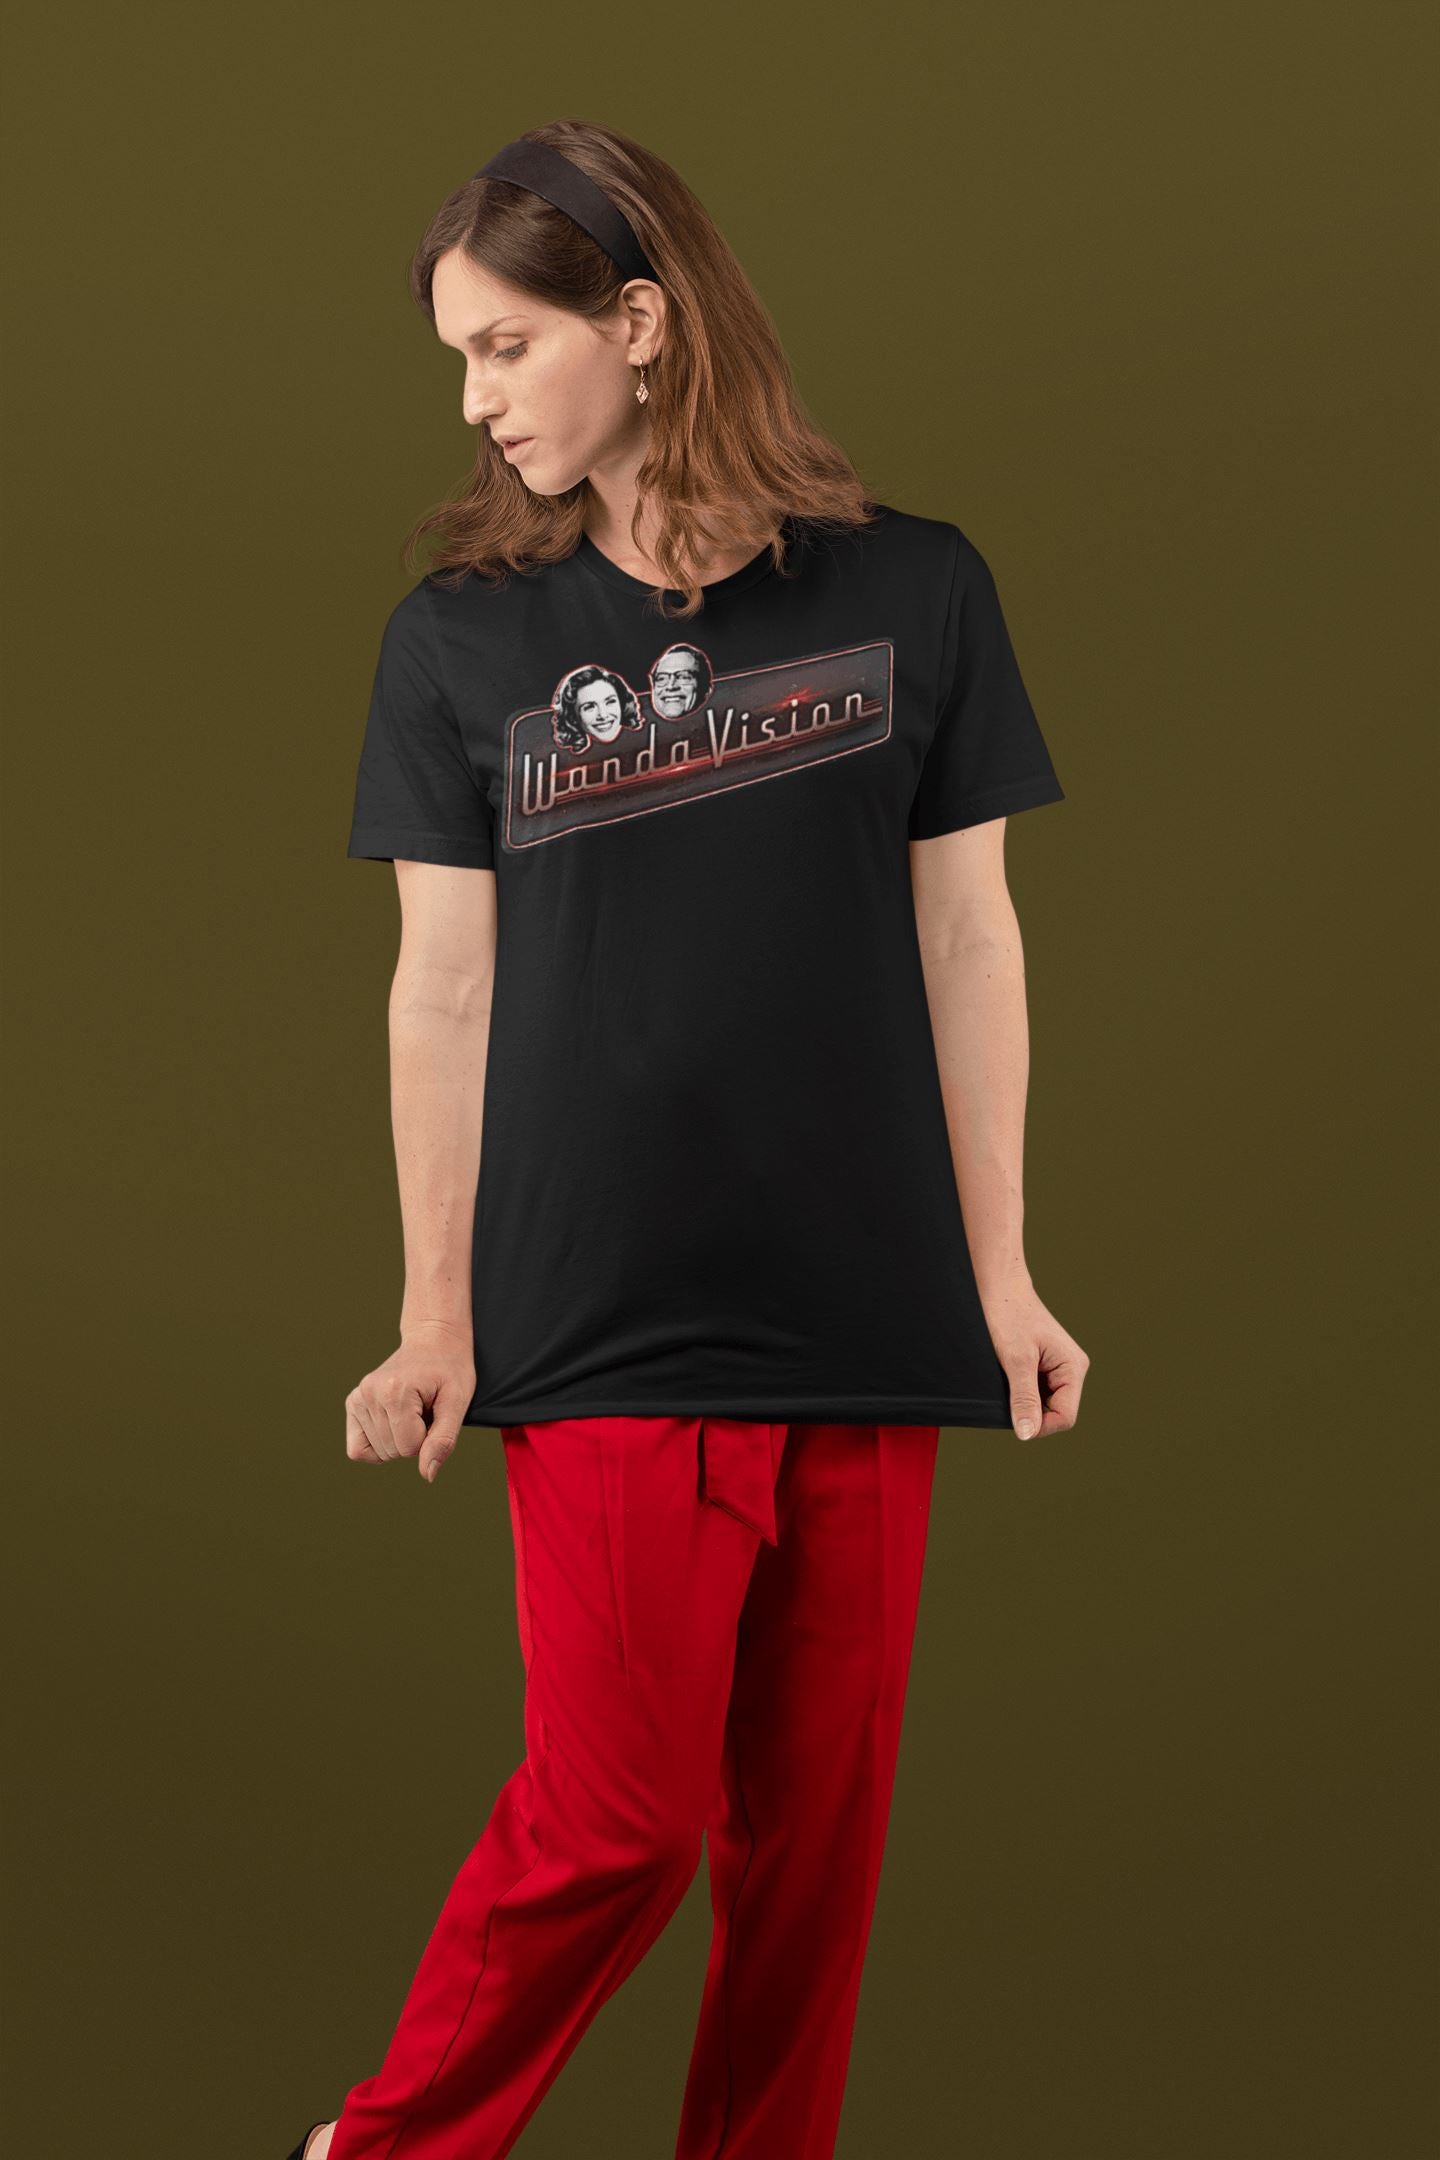 WandaVision Floating Heads Official T Shirt for Men and Women | Premium Design | Catch My Drift India - Catch My Drift India  black, clothing, made in india, marvel, movies, shirt, super, sup